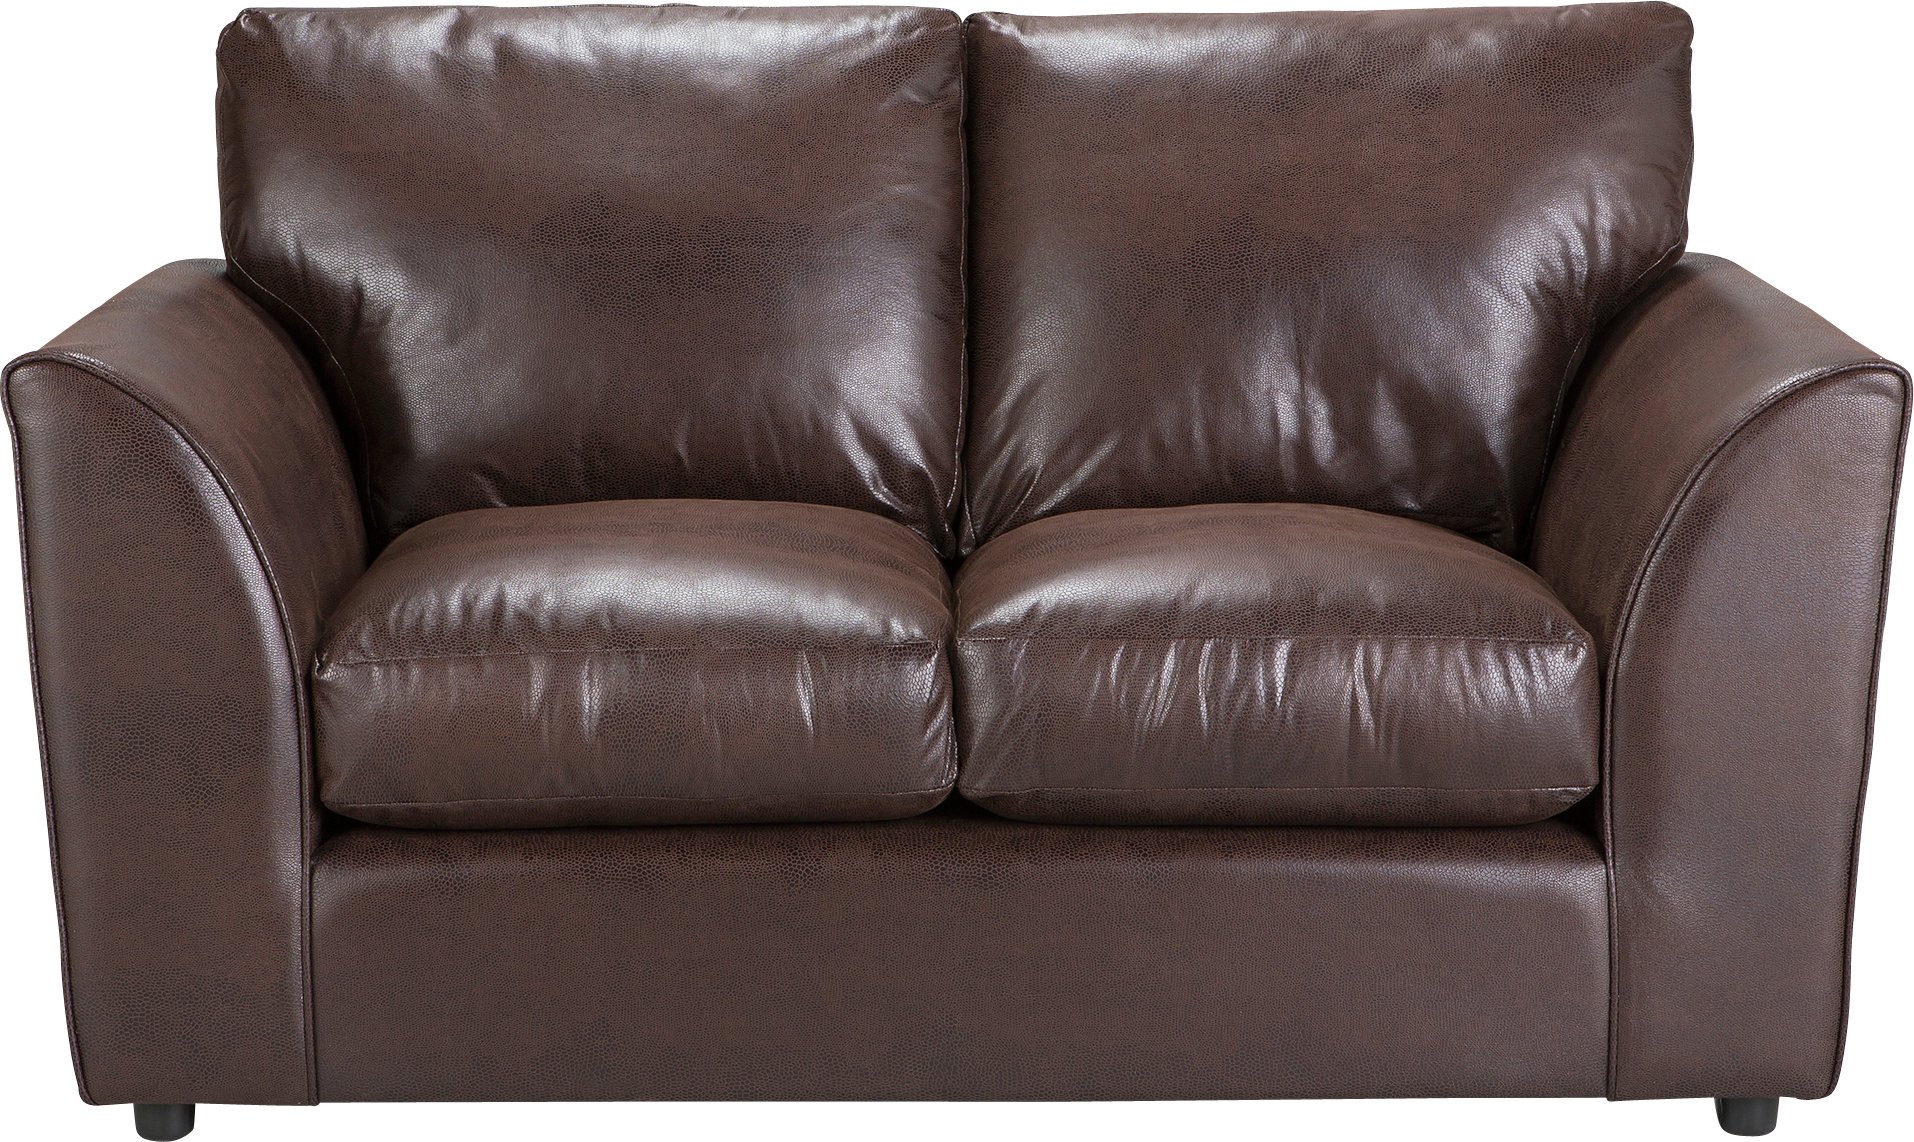 Argos Home New Alfie Compact 2 Seat Leather Eff Sofa - Brown